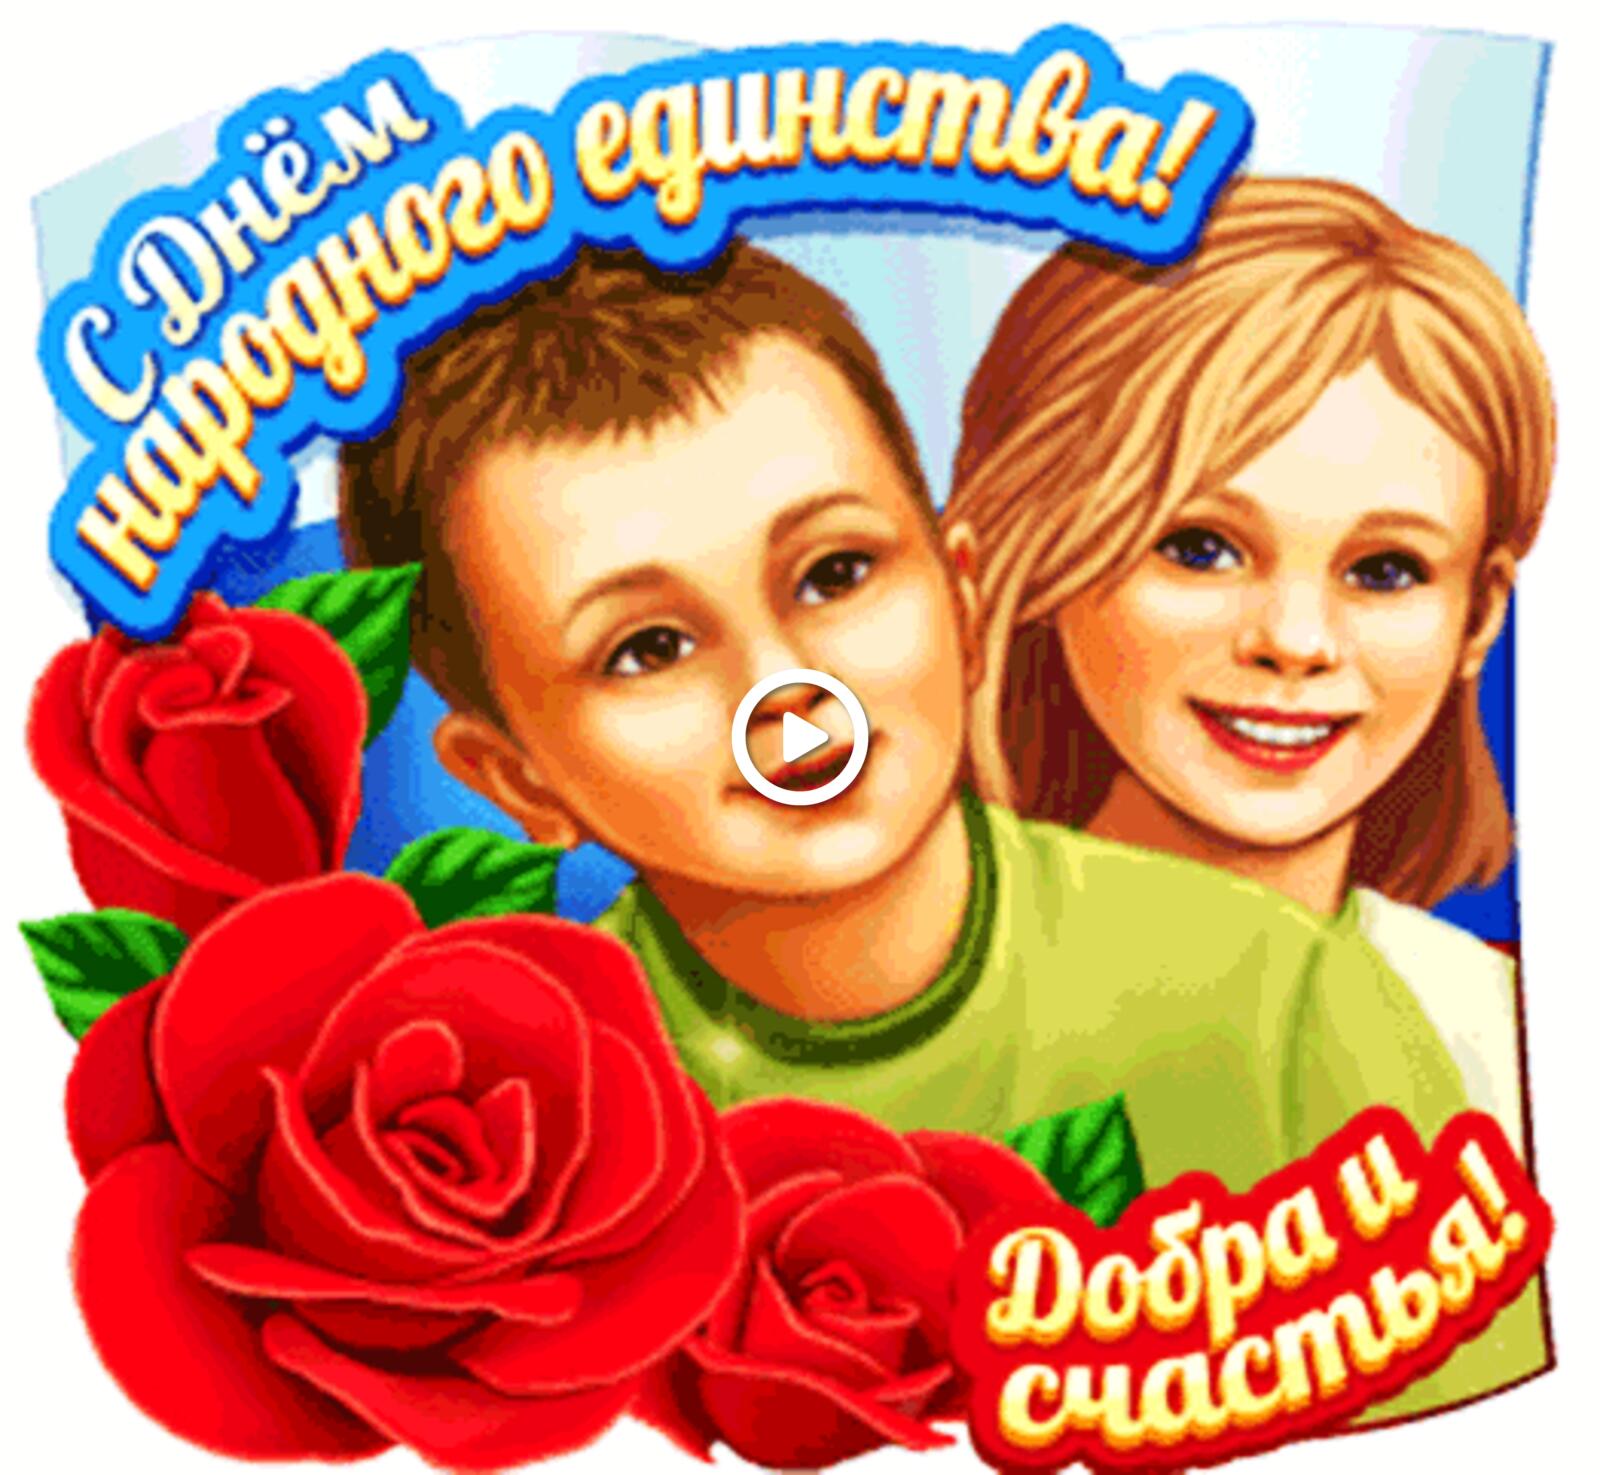 happy national unity day Russian animation